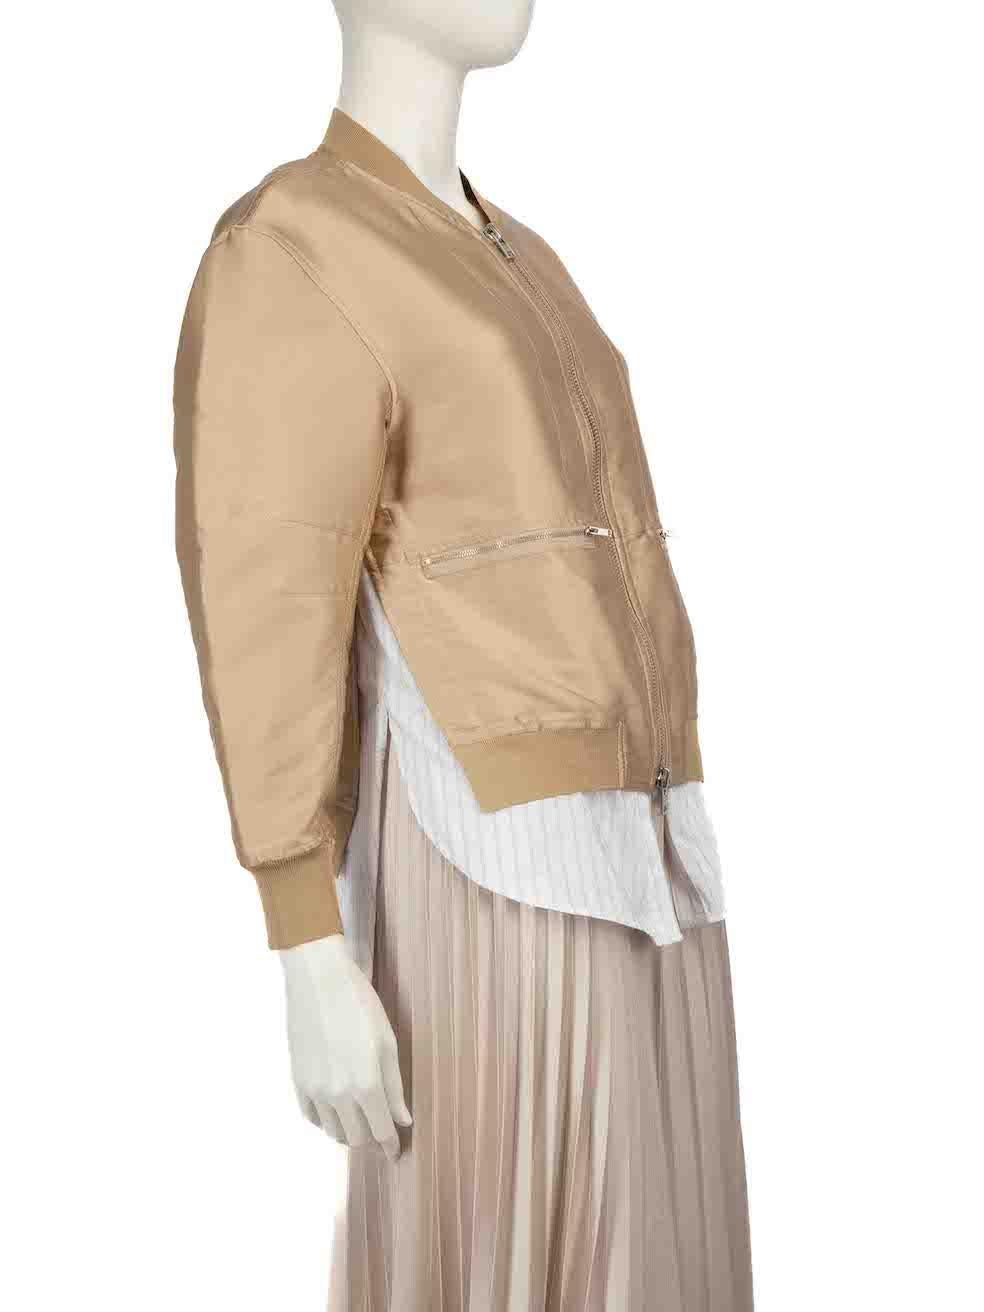 CONDITION is Very good. Hardly any visible wear to the jacket is evident on this used 3.1 Phillip Lim designer resale item.
 
 
 
 Details
 
 
 Beige
 
 Polyester
 
 Bomber jacket
 
 Bi-layered accent
 
 Stripe pattern layer
 
 Front double zip